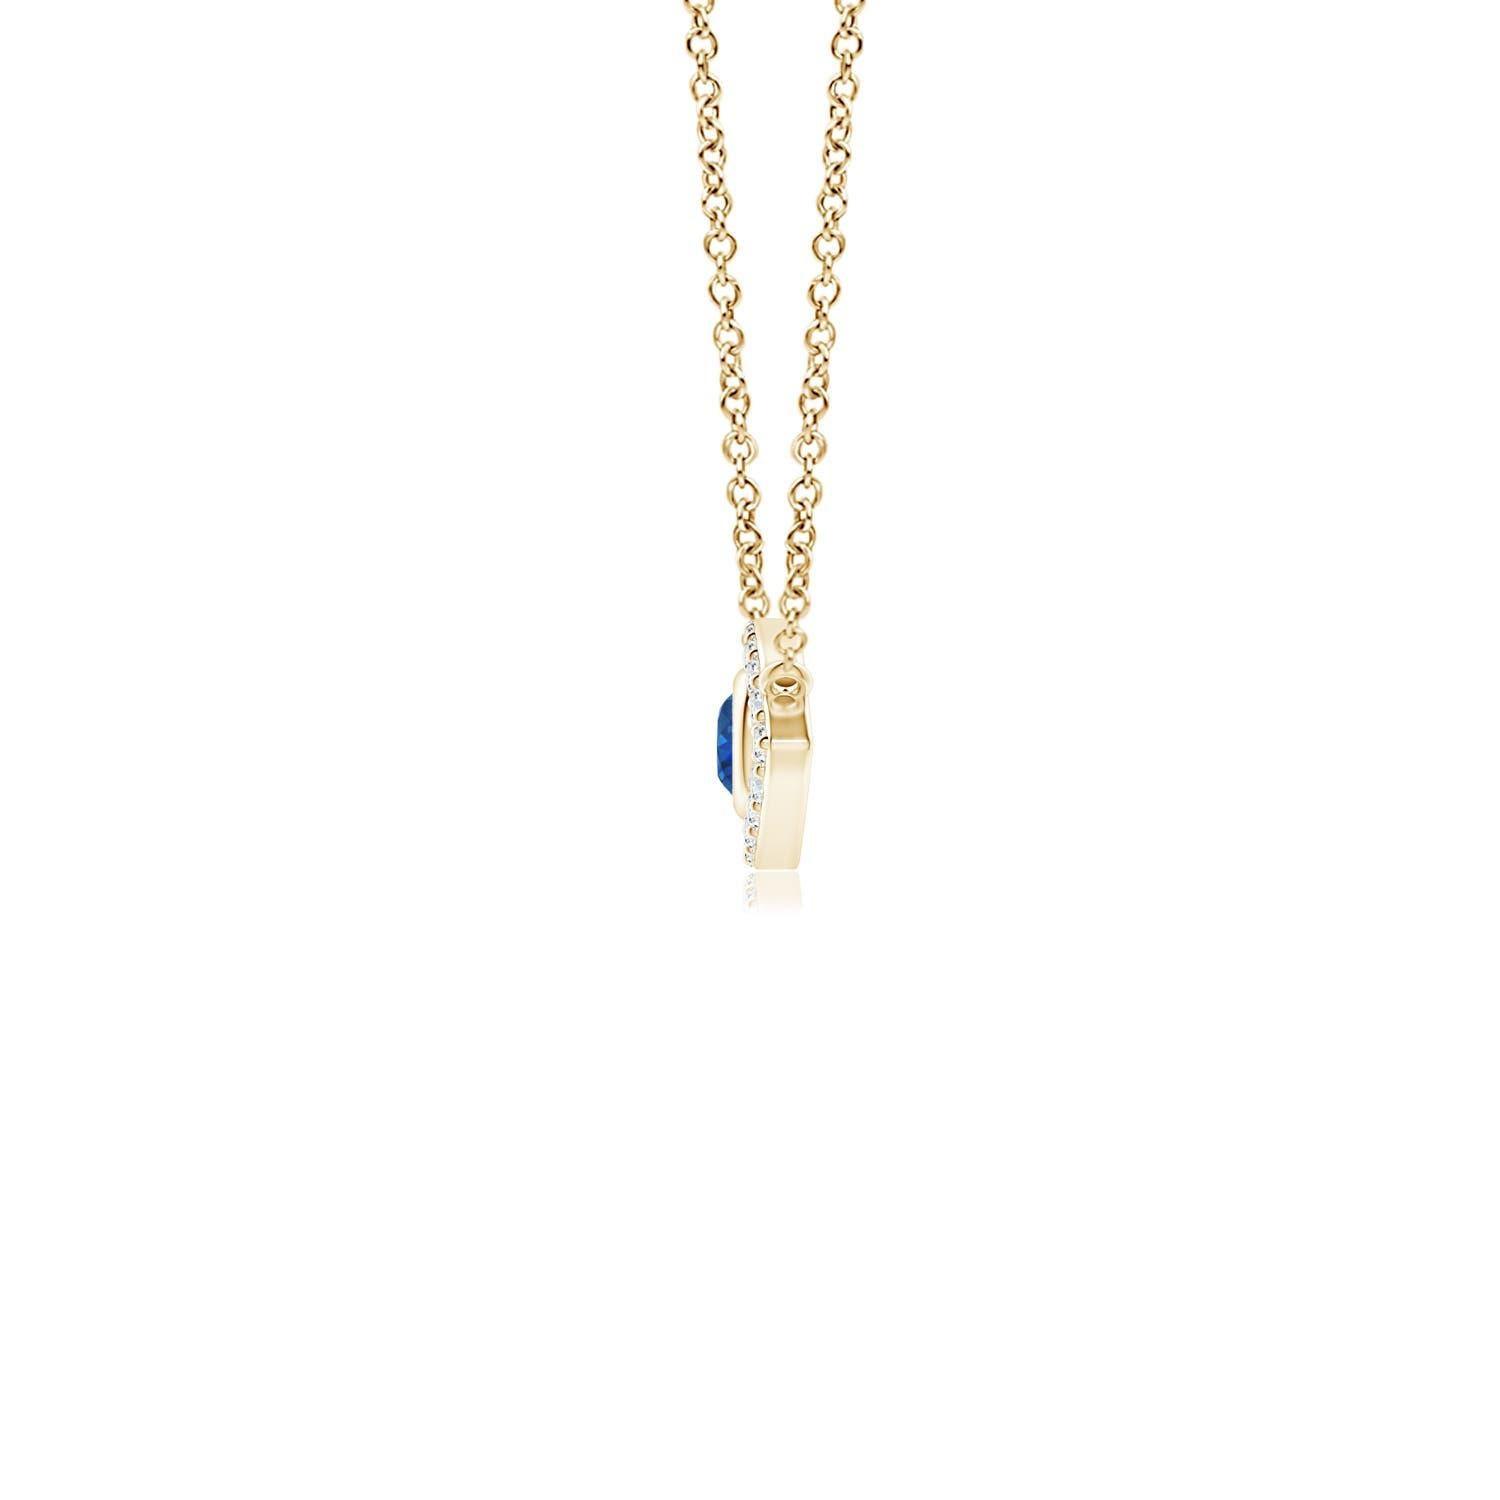 Hanging gracefully from a shiny metal bale is a diamond studded frame with a round sapphire bezel set at the center. The sparkling diamonds create a compelling contrast against the deep blue sapphire. Crafted in 14k yellow gold, this sapphire evil